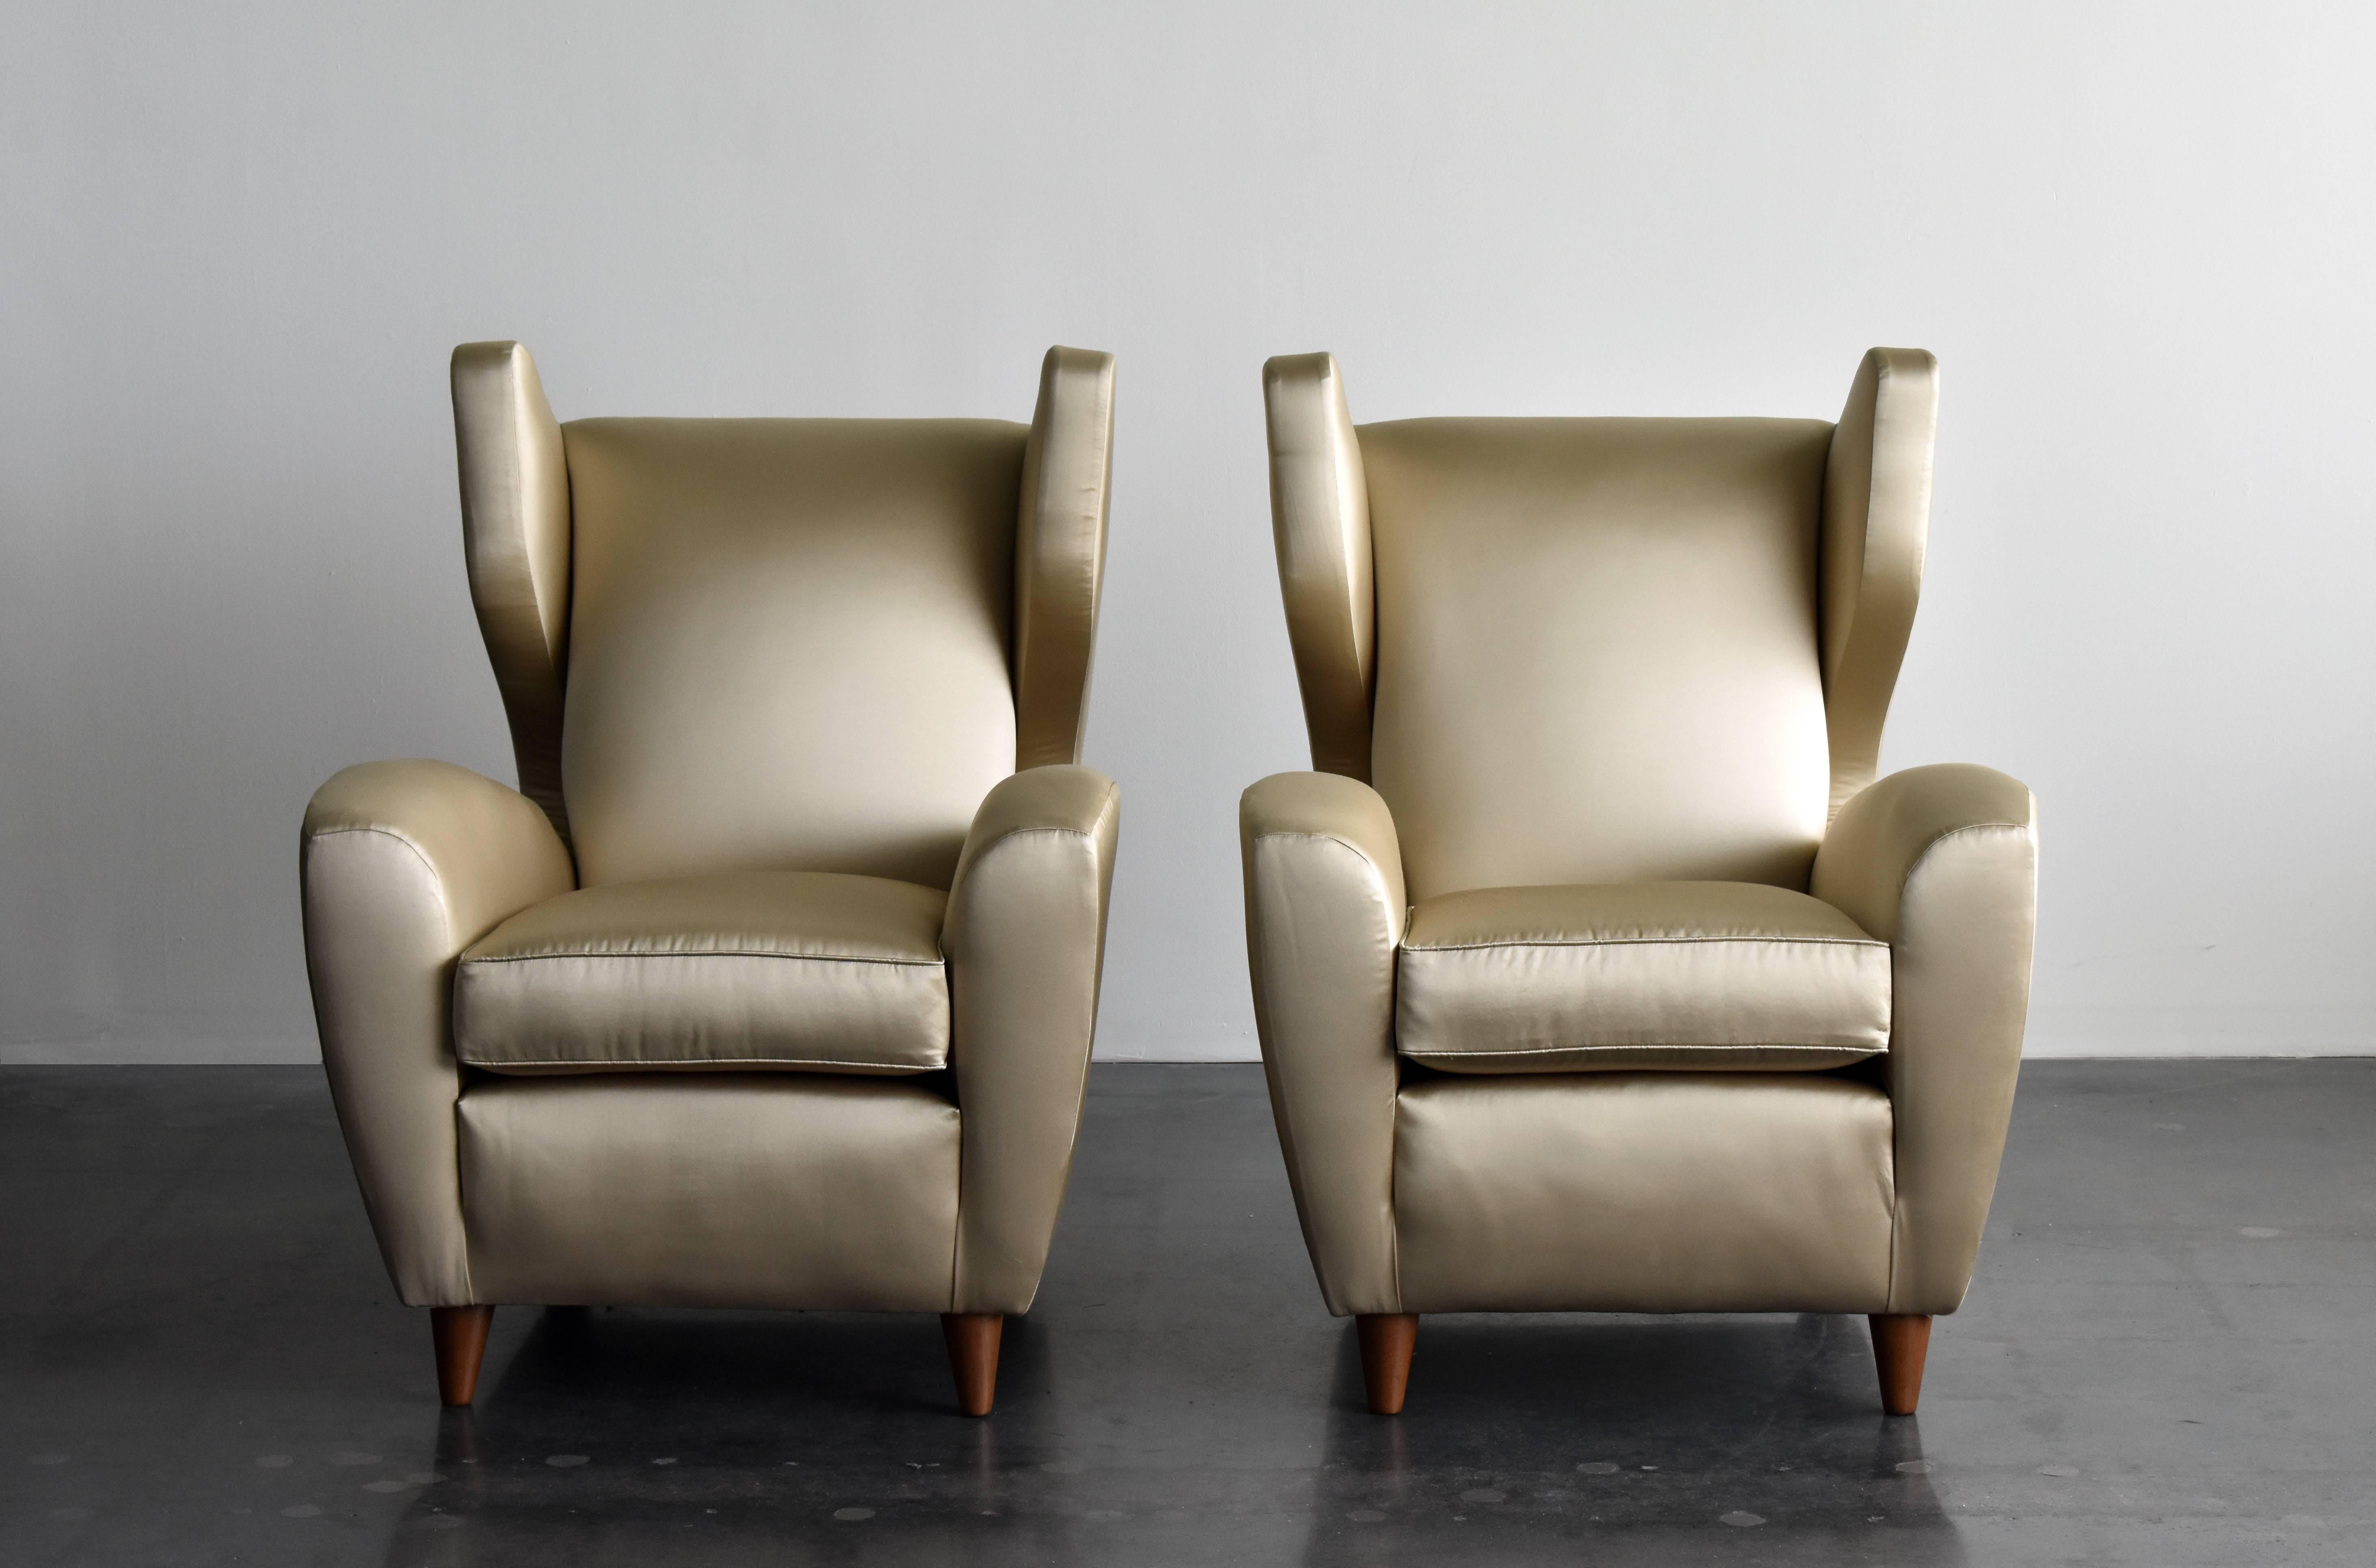 Italian Melchiorre Bega, Lounge or Wingback Chairs in Light Gold Fabric, Italy, 1950s For Sale